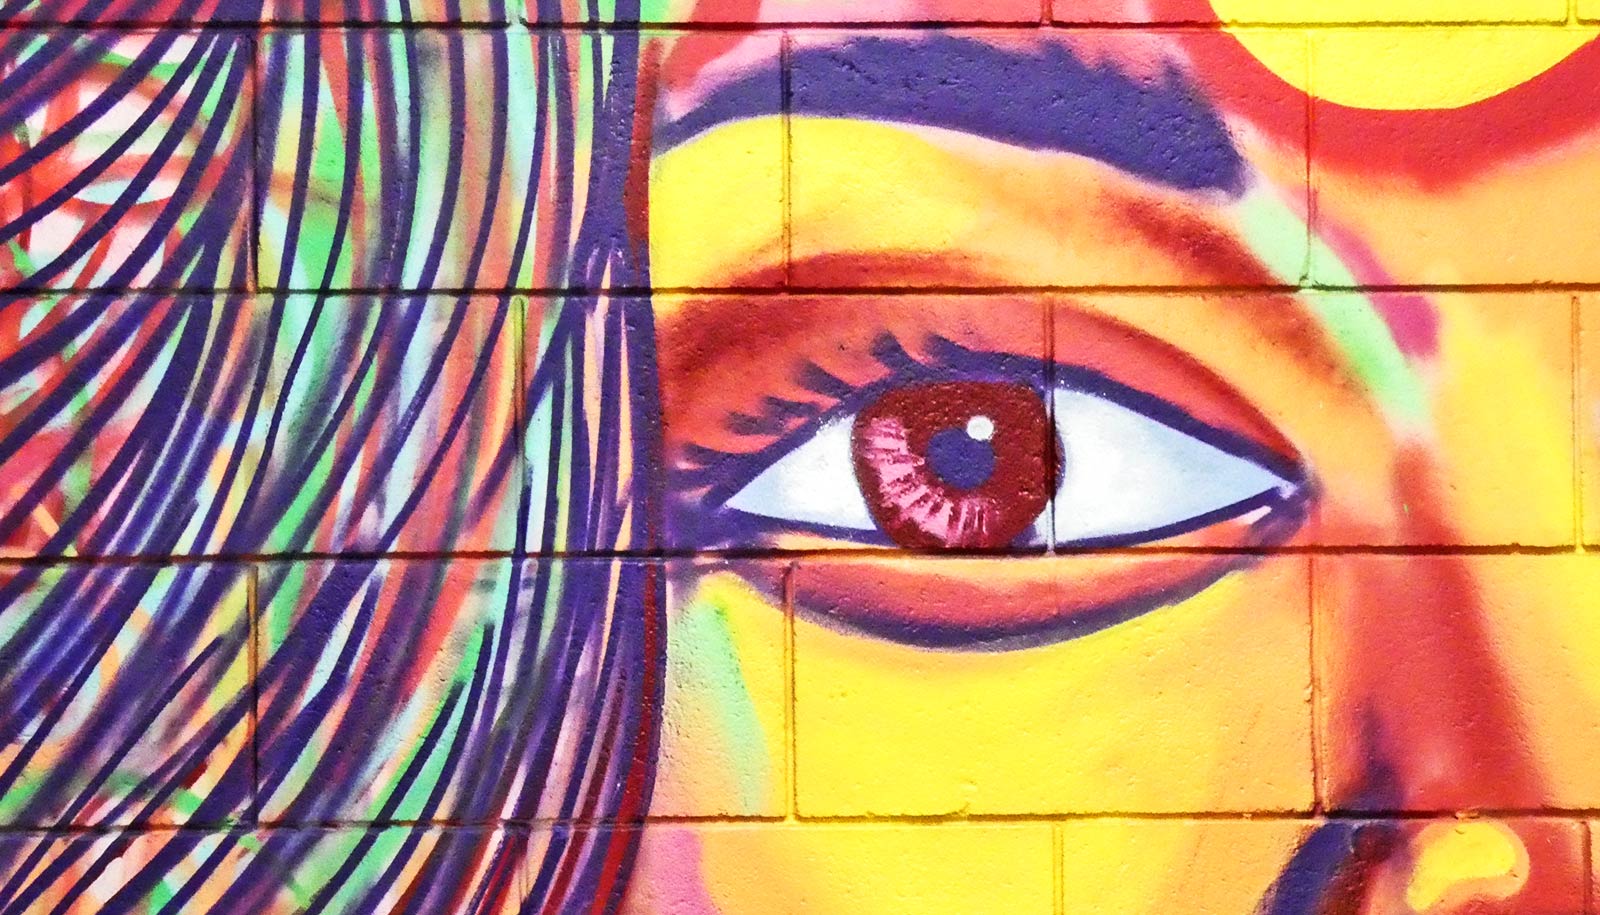 A painted mural shows a woman's eye and hair in bright colors on a brick wall.